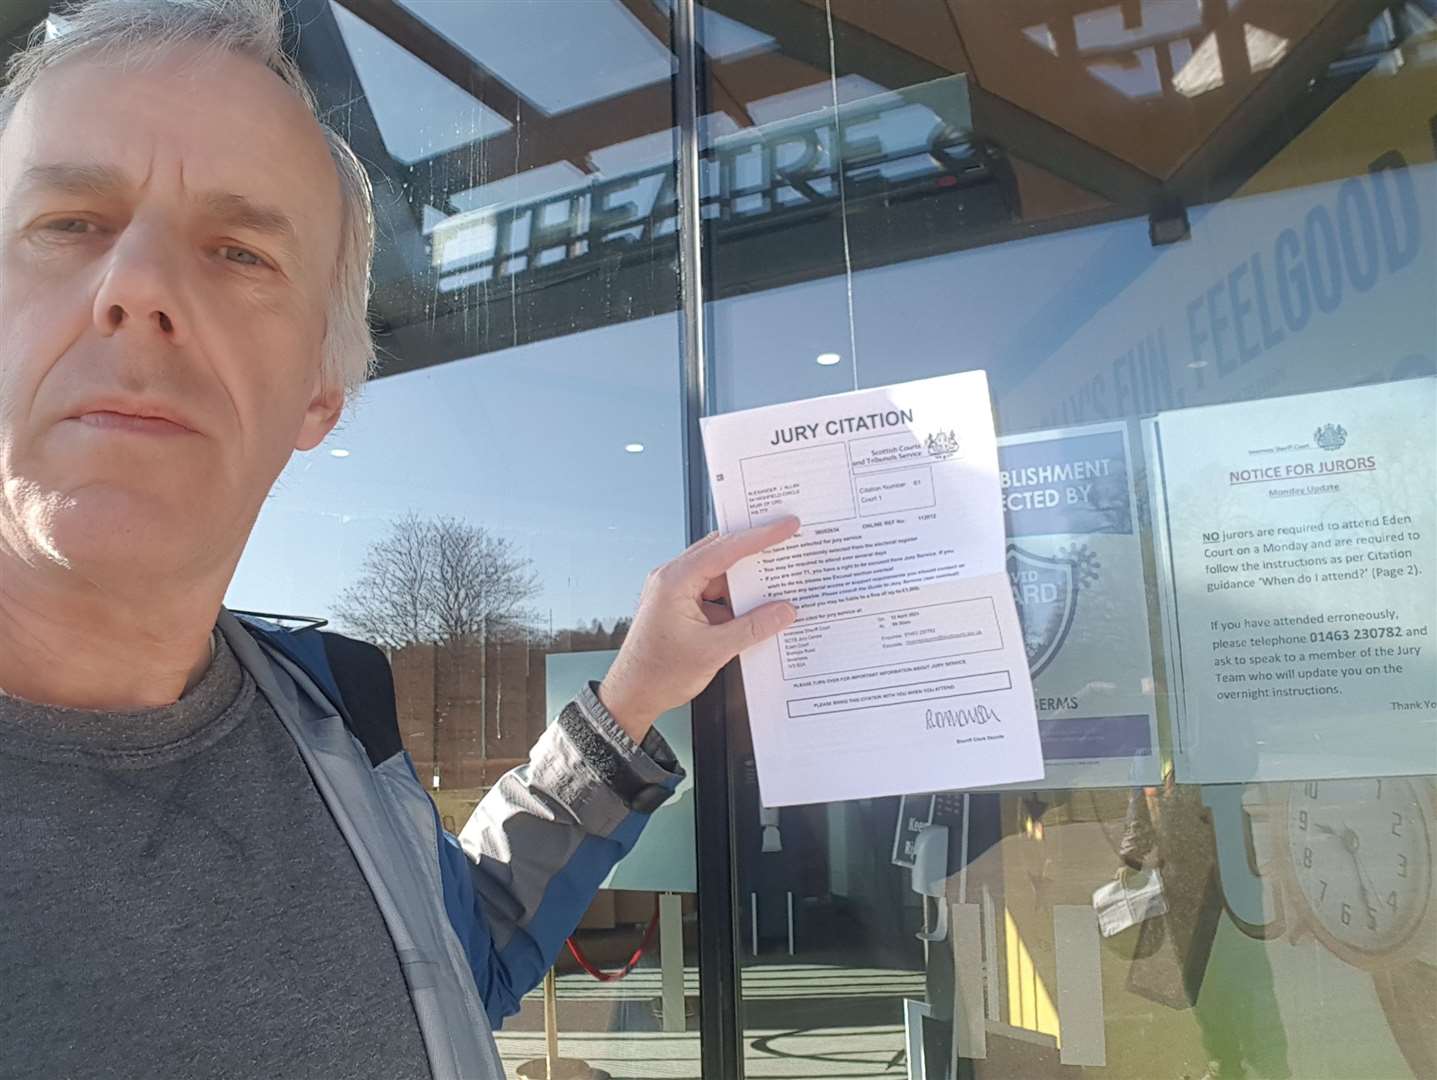 Alexander Allan, at Eden Court, with his "confusing" jury citation letter and the notice saying there is no need to attend on a Monday.